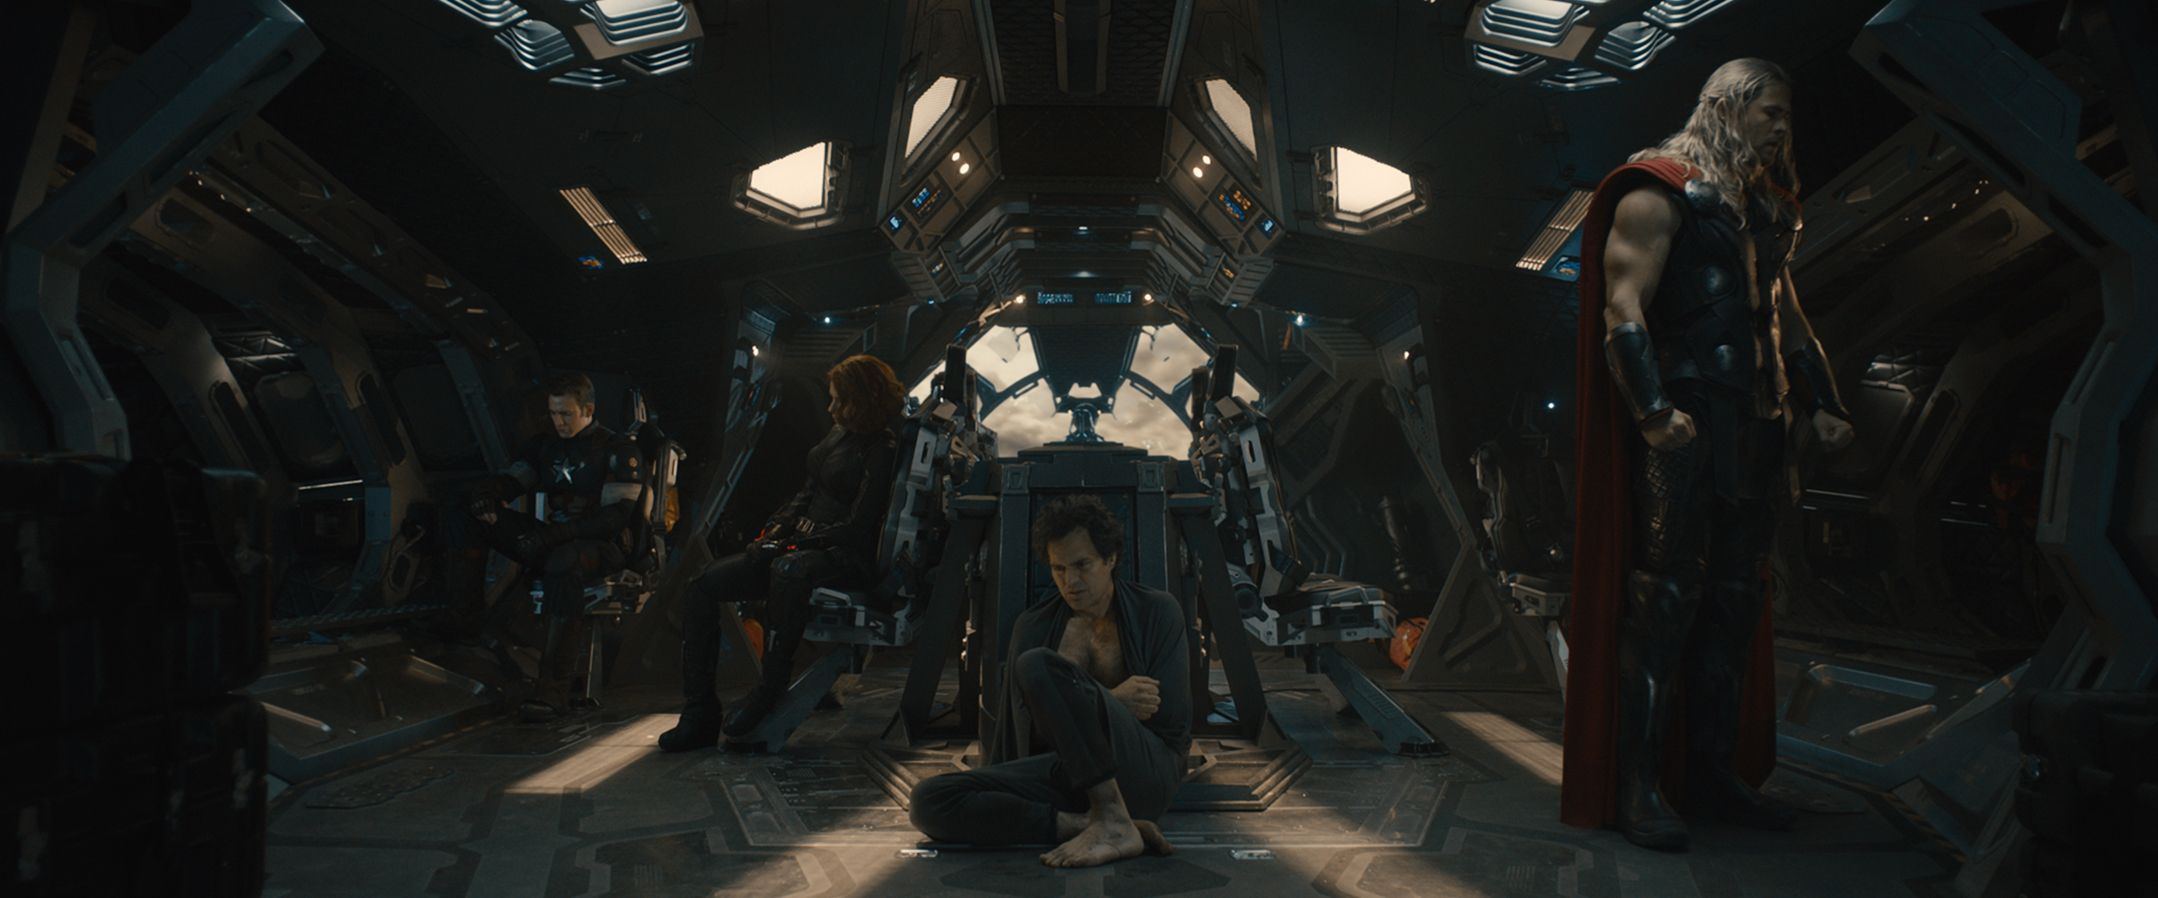 The Avengers Age of Ultron Photo 11